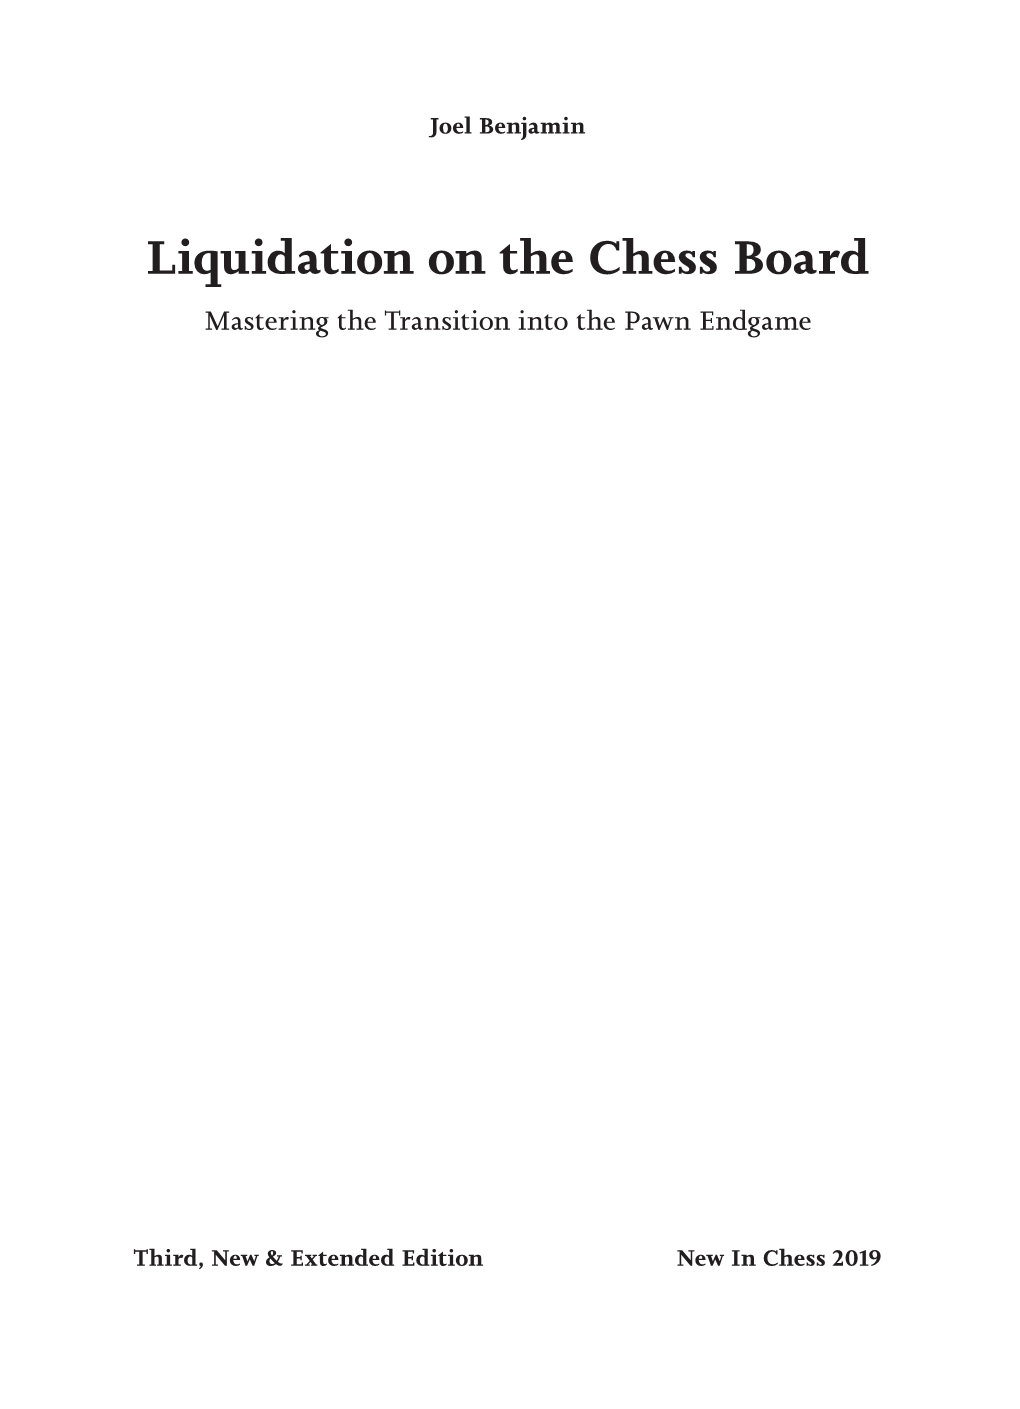 Liquidation on the Chess Board Mastering the Transition Into the Pawn Endgame